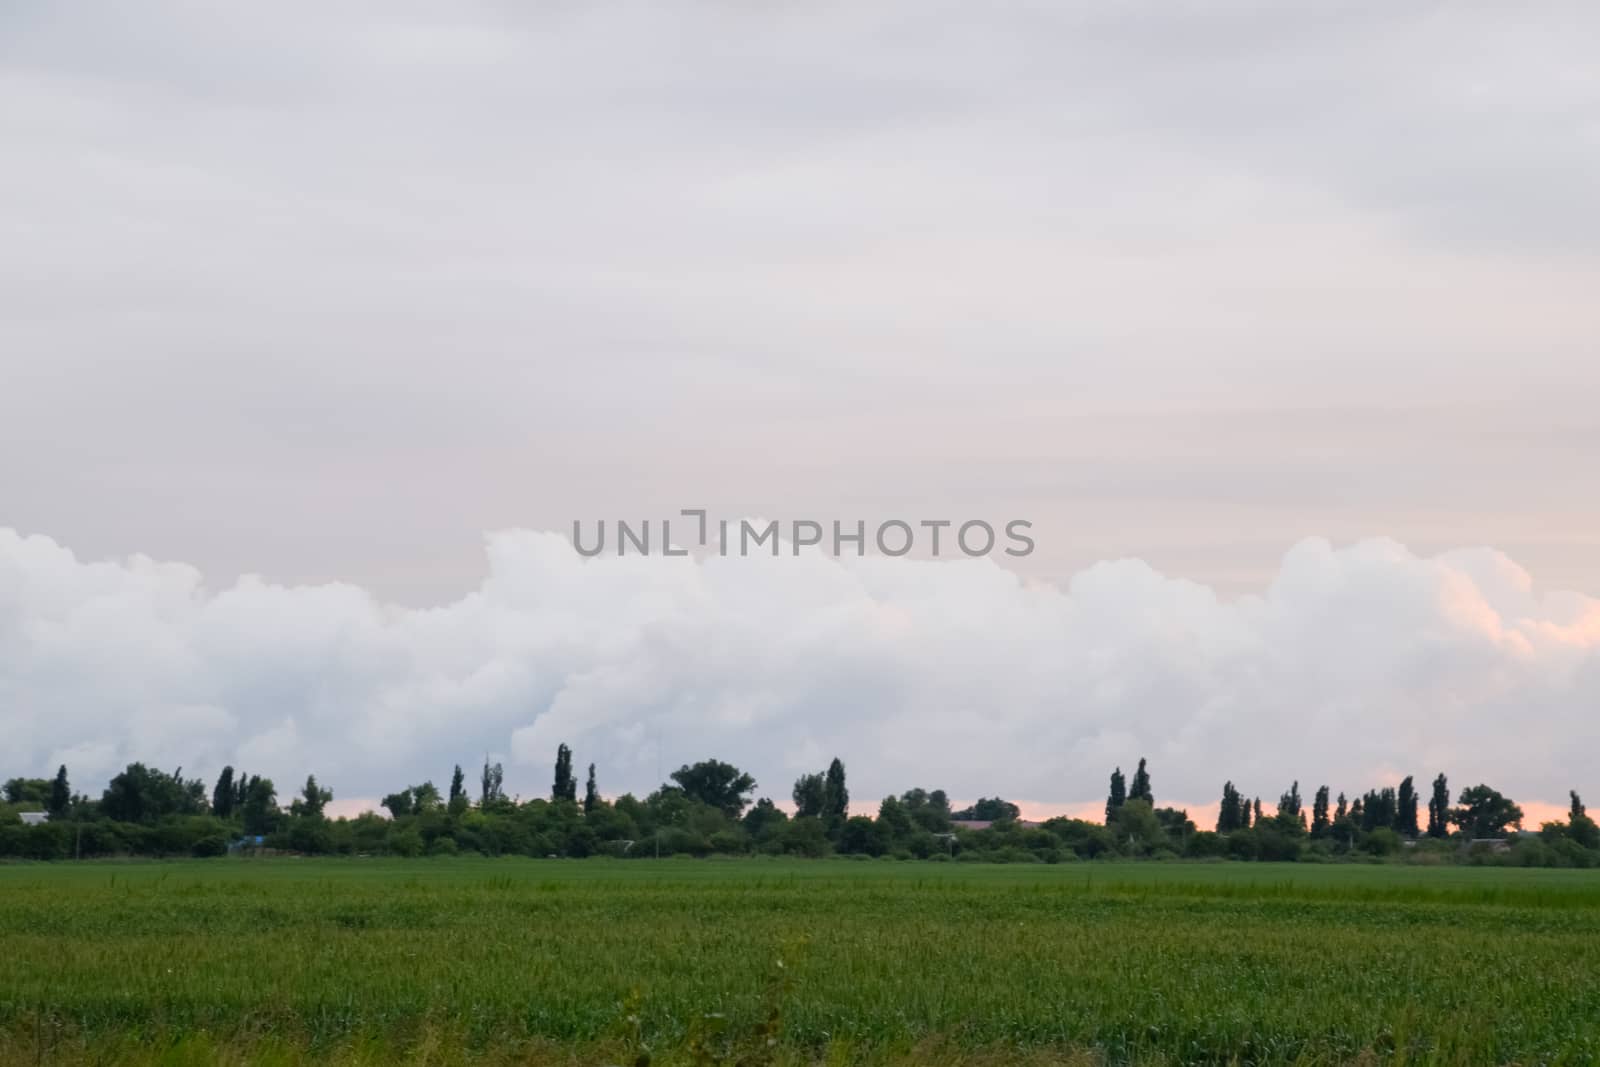 Cloudy landscape, the village before the rain, visible large cumulus clouds and clouds over the village.